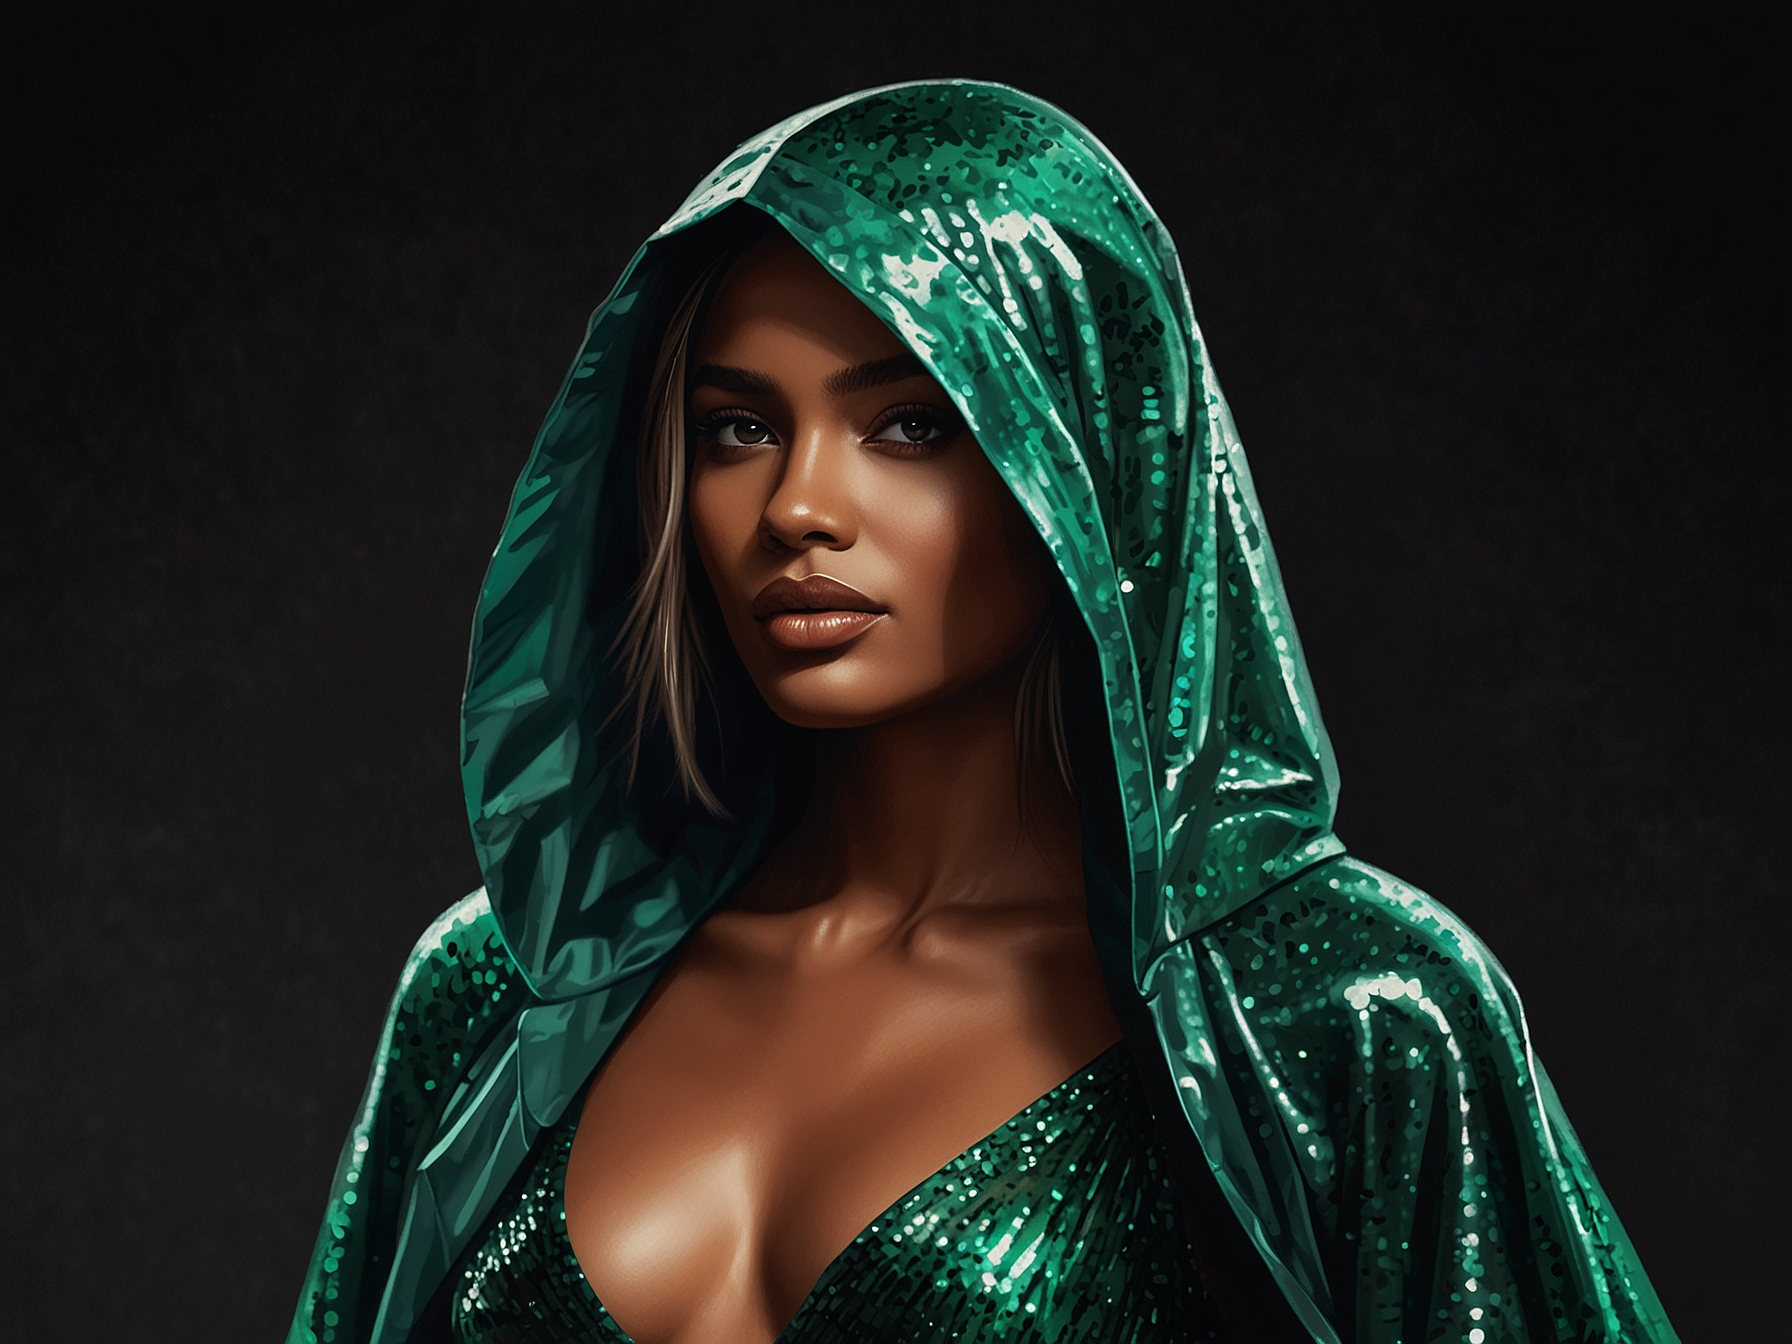 Ciara poses confidently with her hooded green mesh cloak and shimmering sequin bodysuit, showcasing her bold and innovative style at the star-studded Vogue World Paris event.